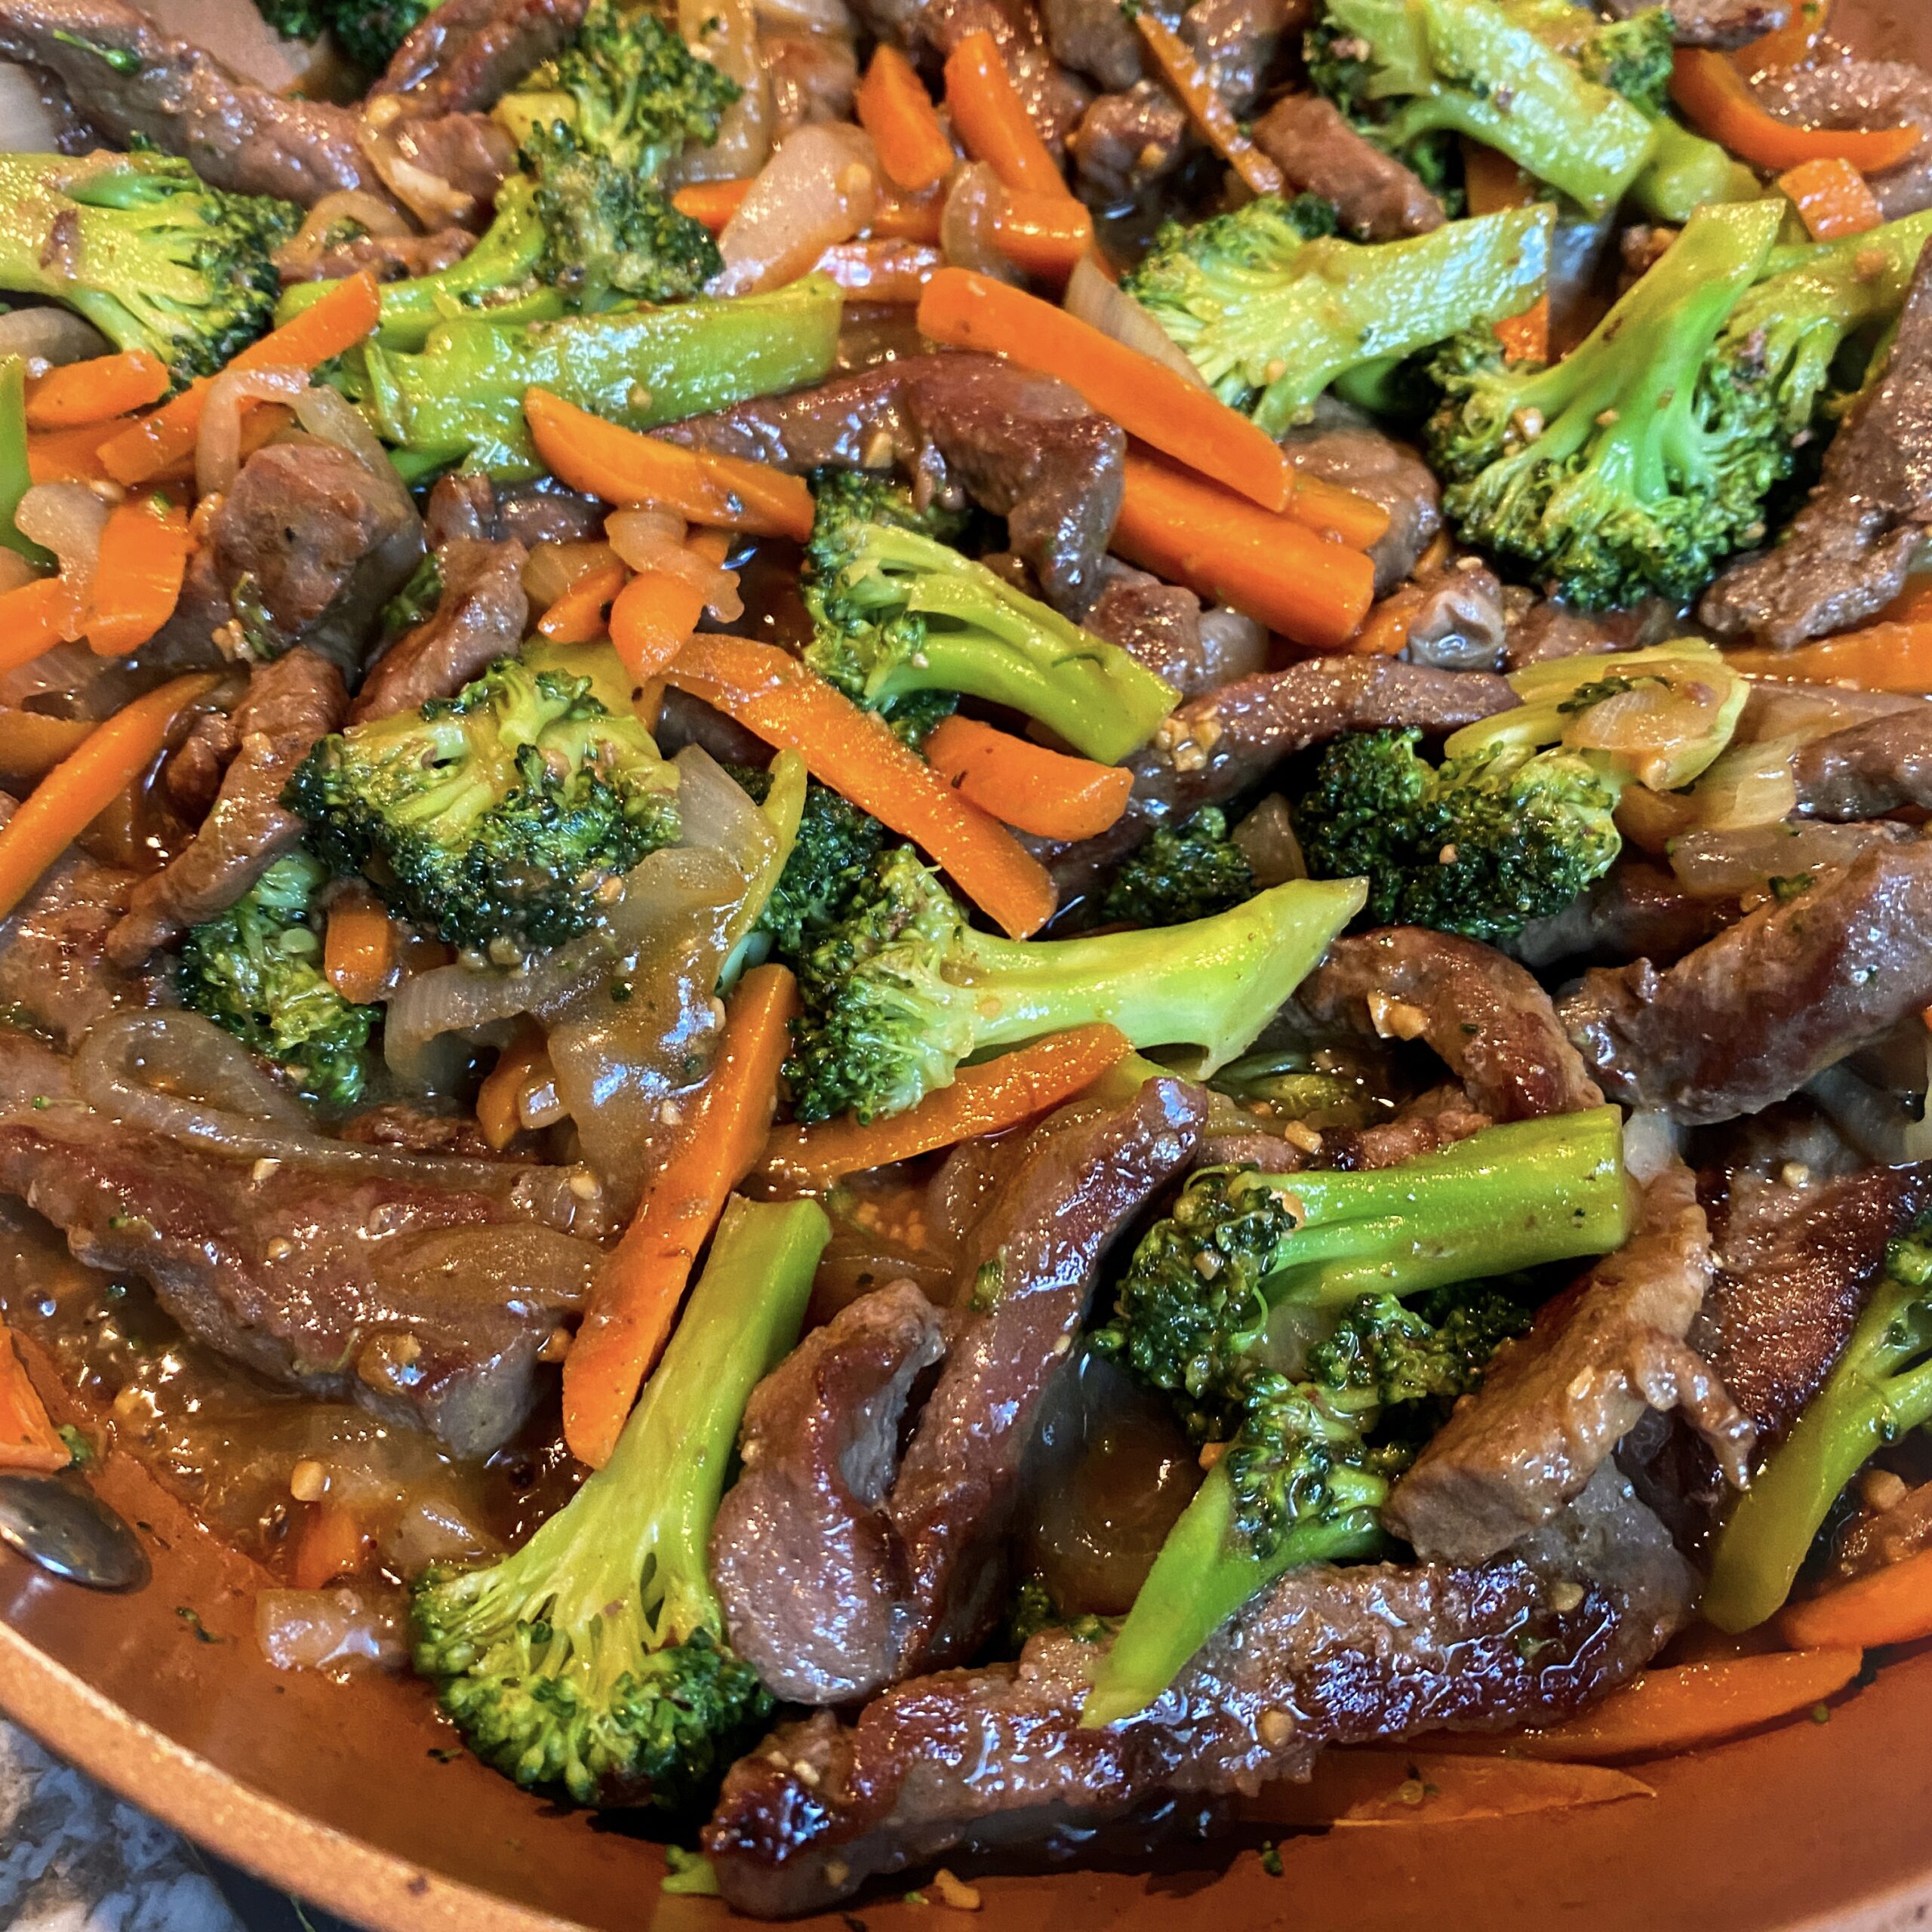 Stir fry sliced beef with shredded carrots and broccoli florets in a large skillet.